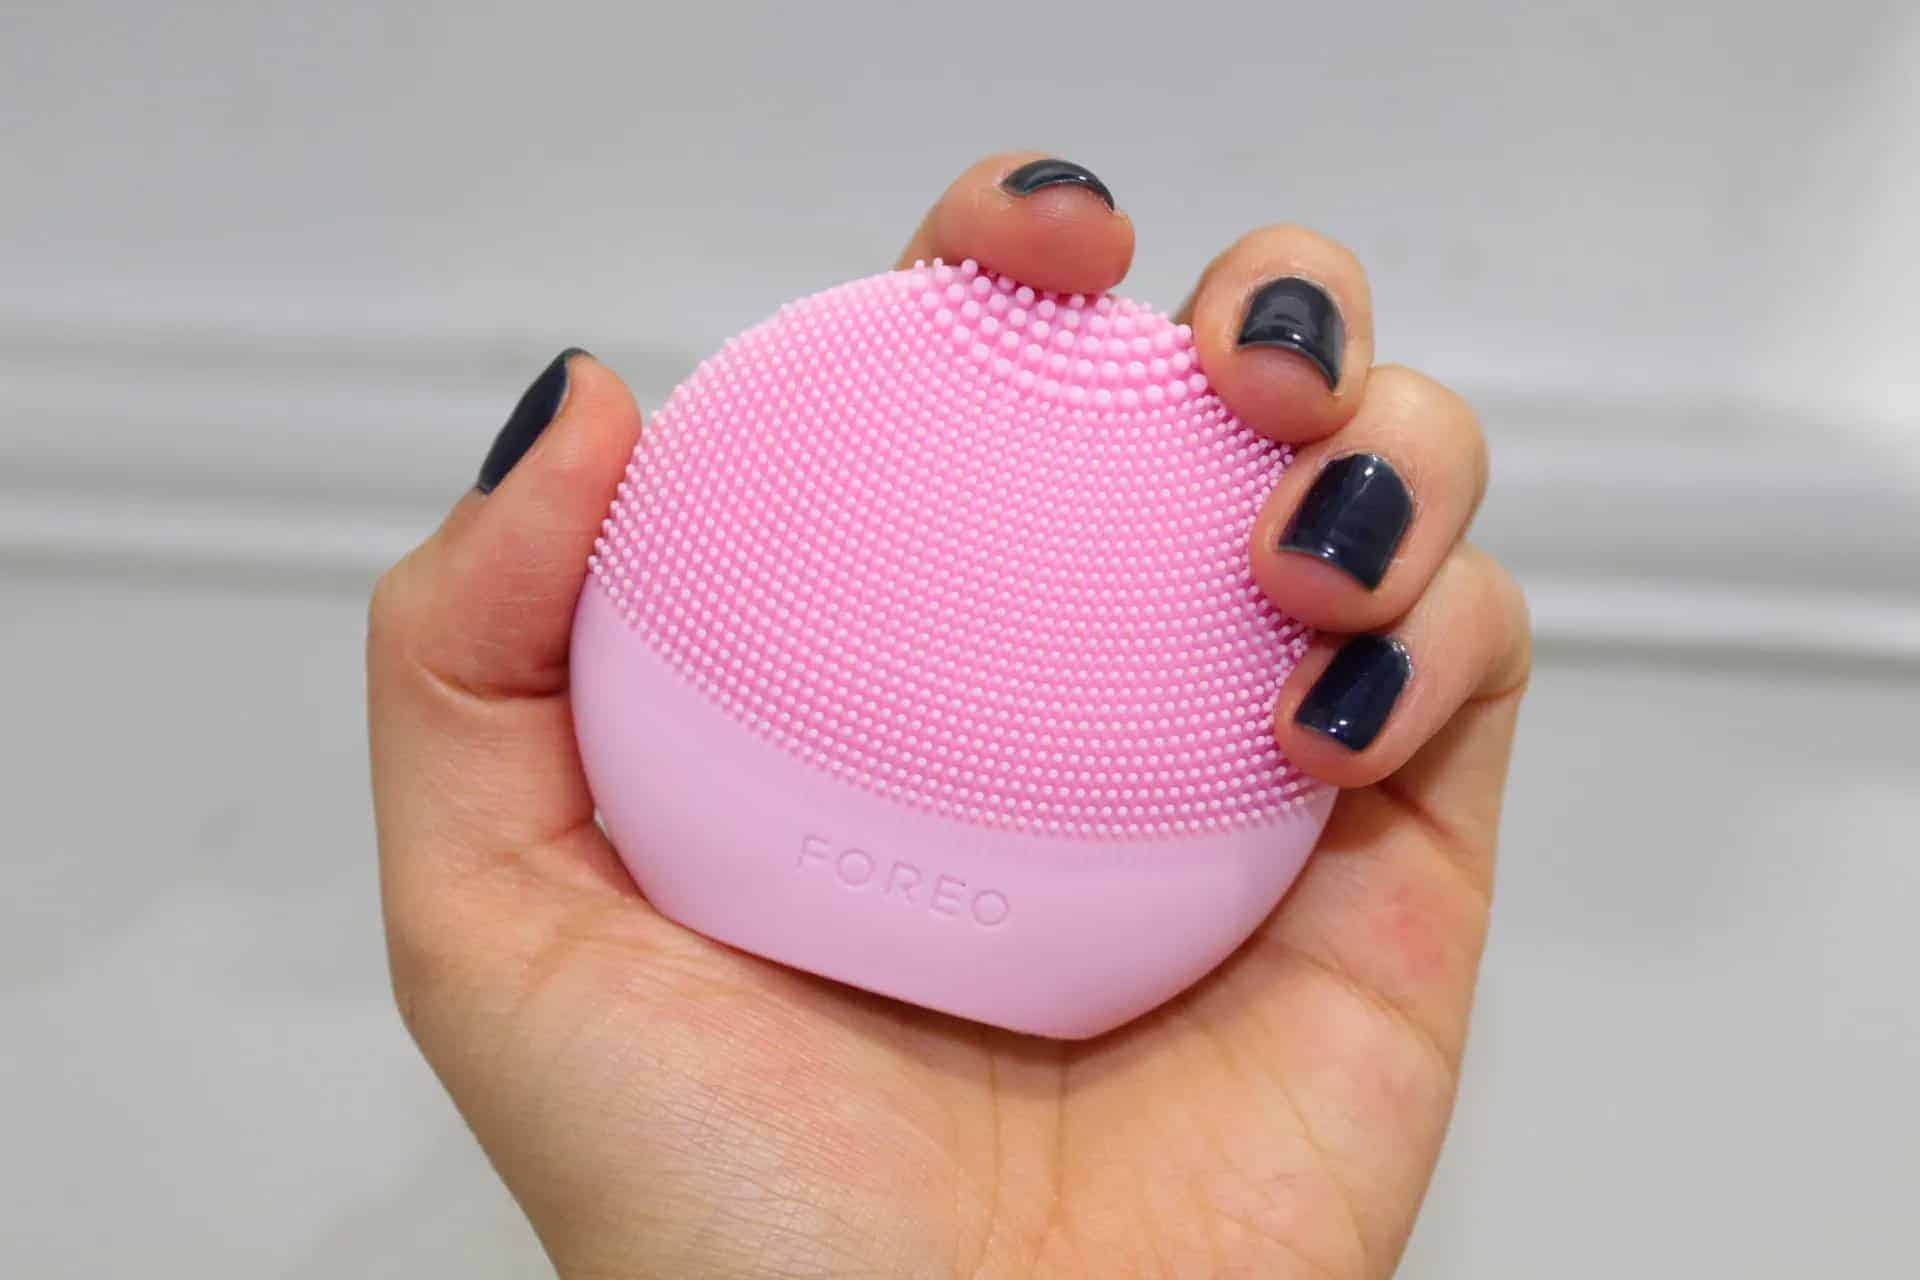 The Foreo Luna Cleanser